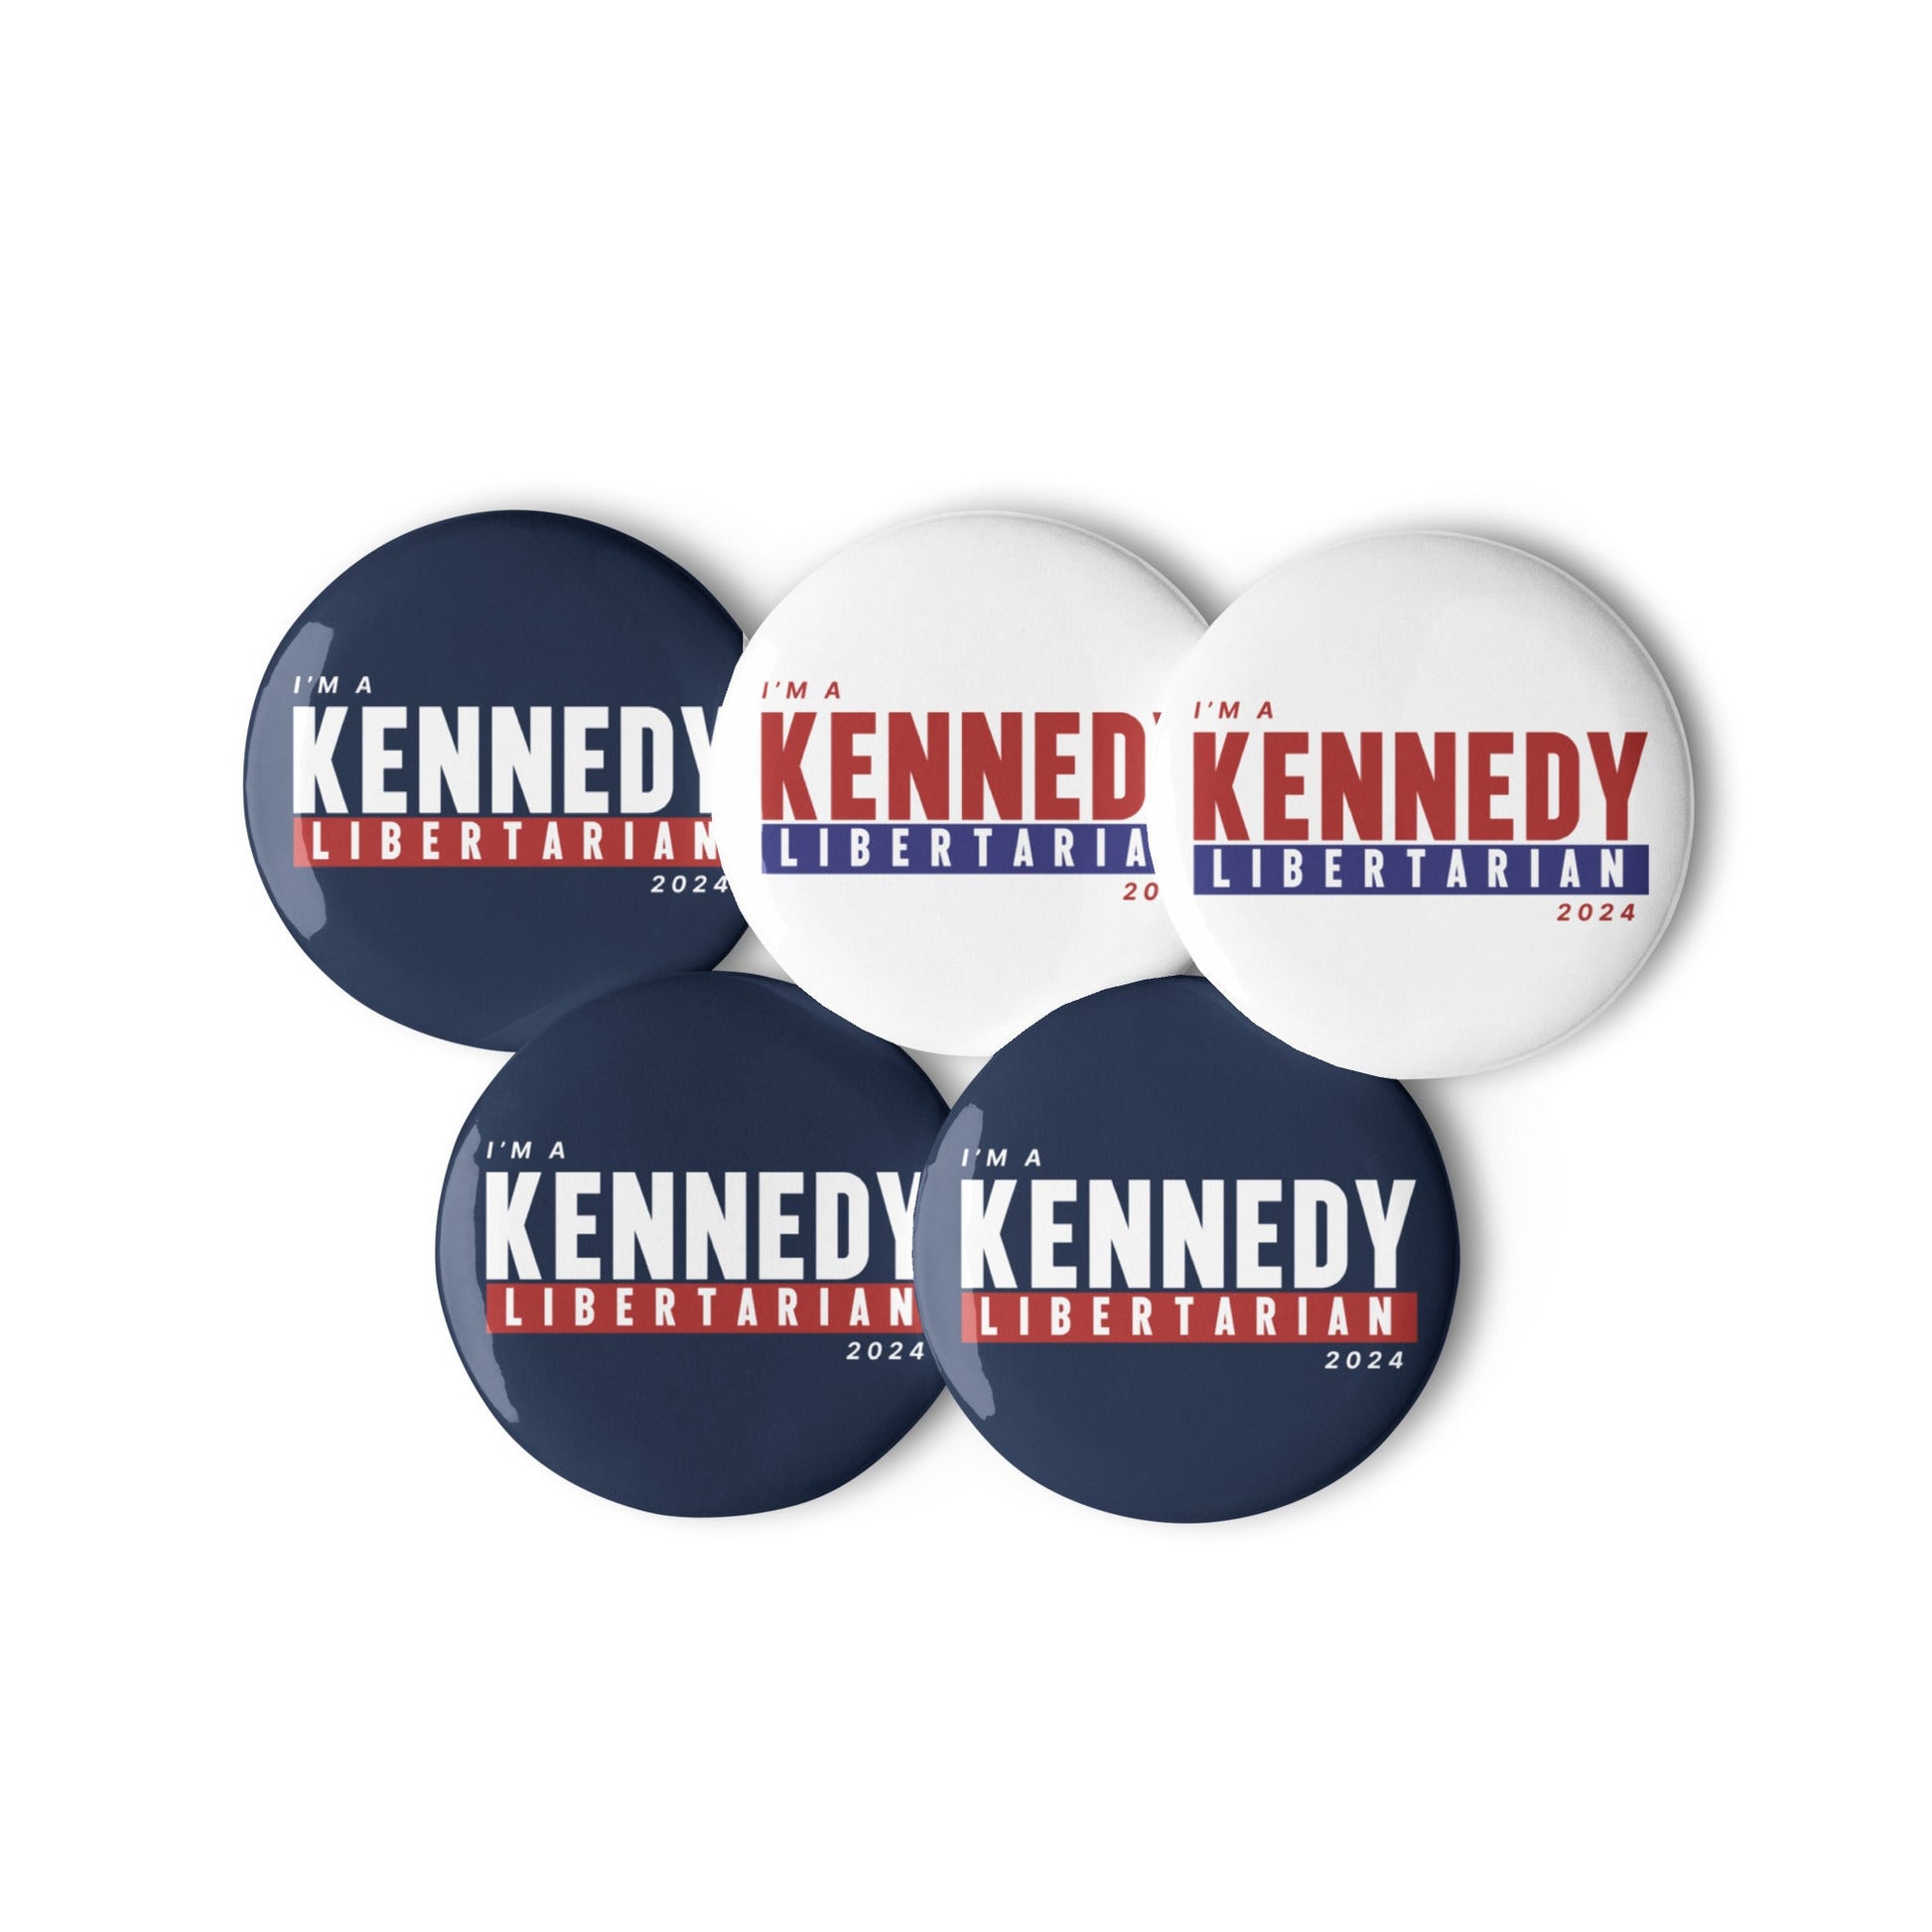 I'm a Kennedy Libertarian (5 Buttons) - TEAM KENNEDY. All rights reserved